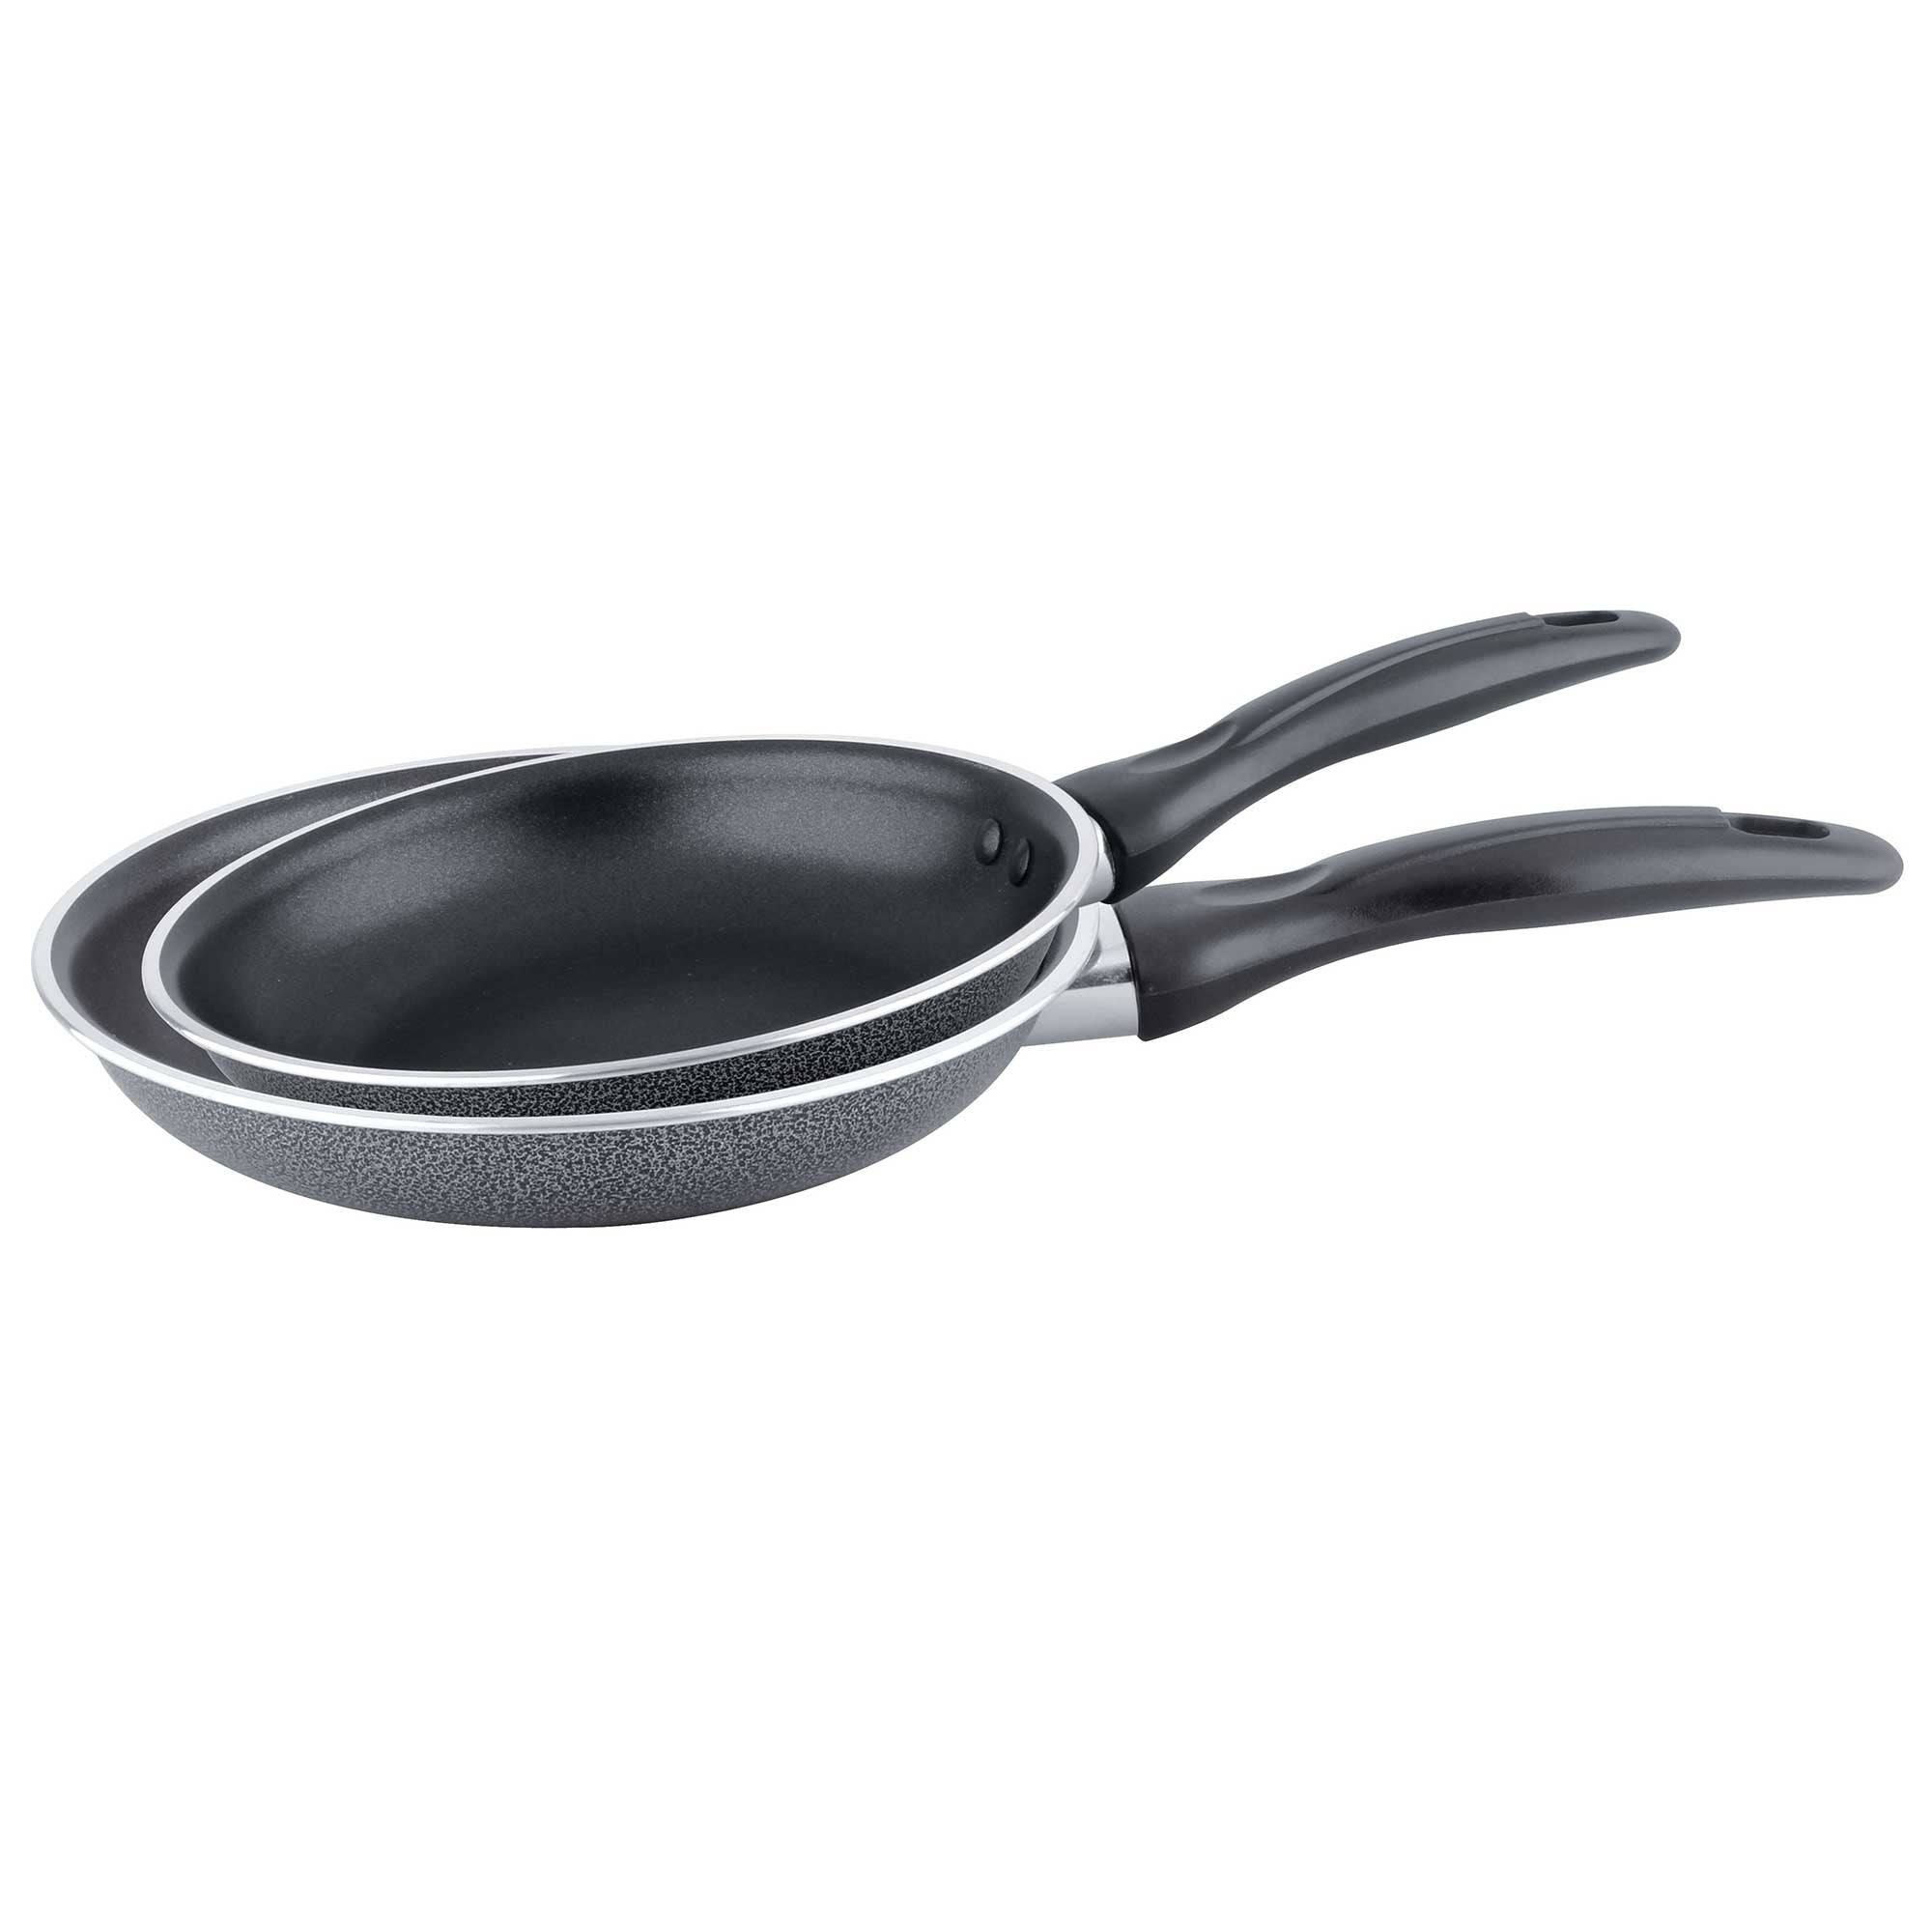 Brentwood BFP-2911B 9-inch and 11-inch Aluminum Non-Stick Fry Pan Set, Black